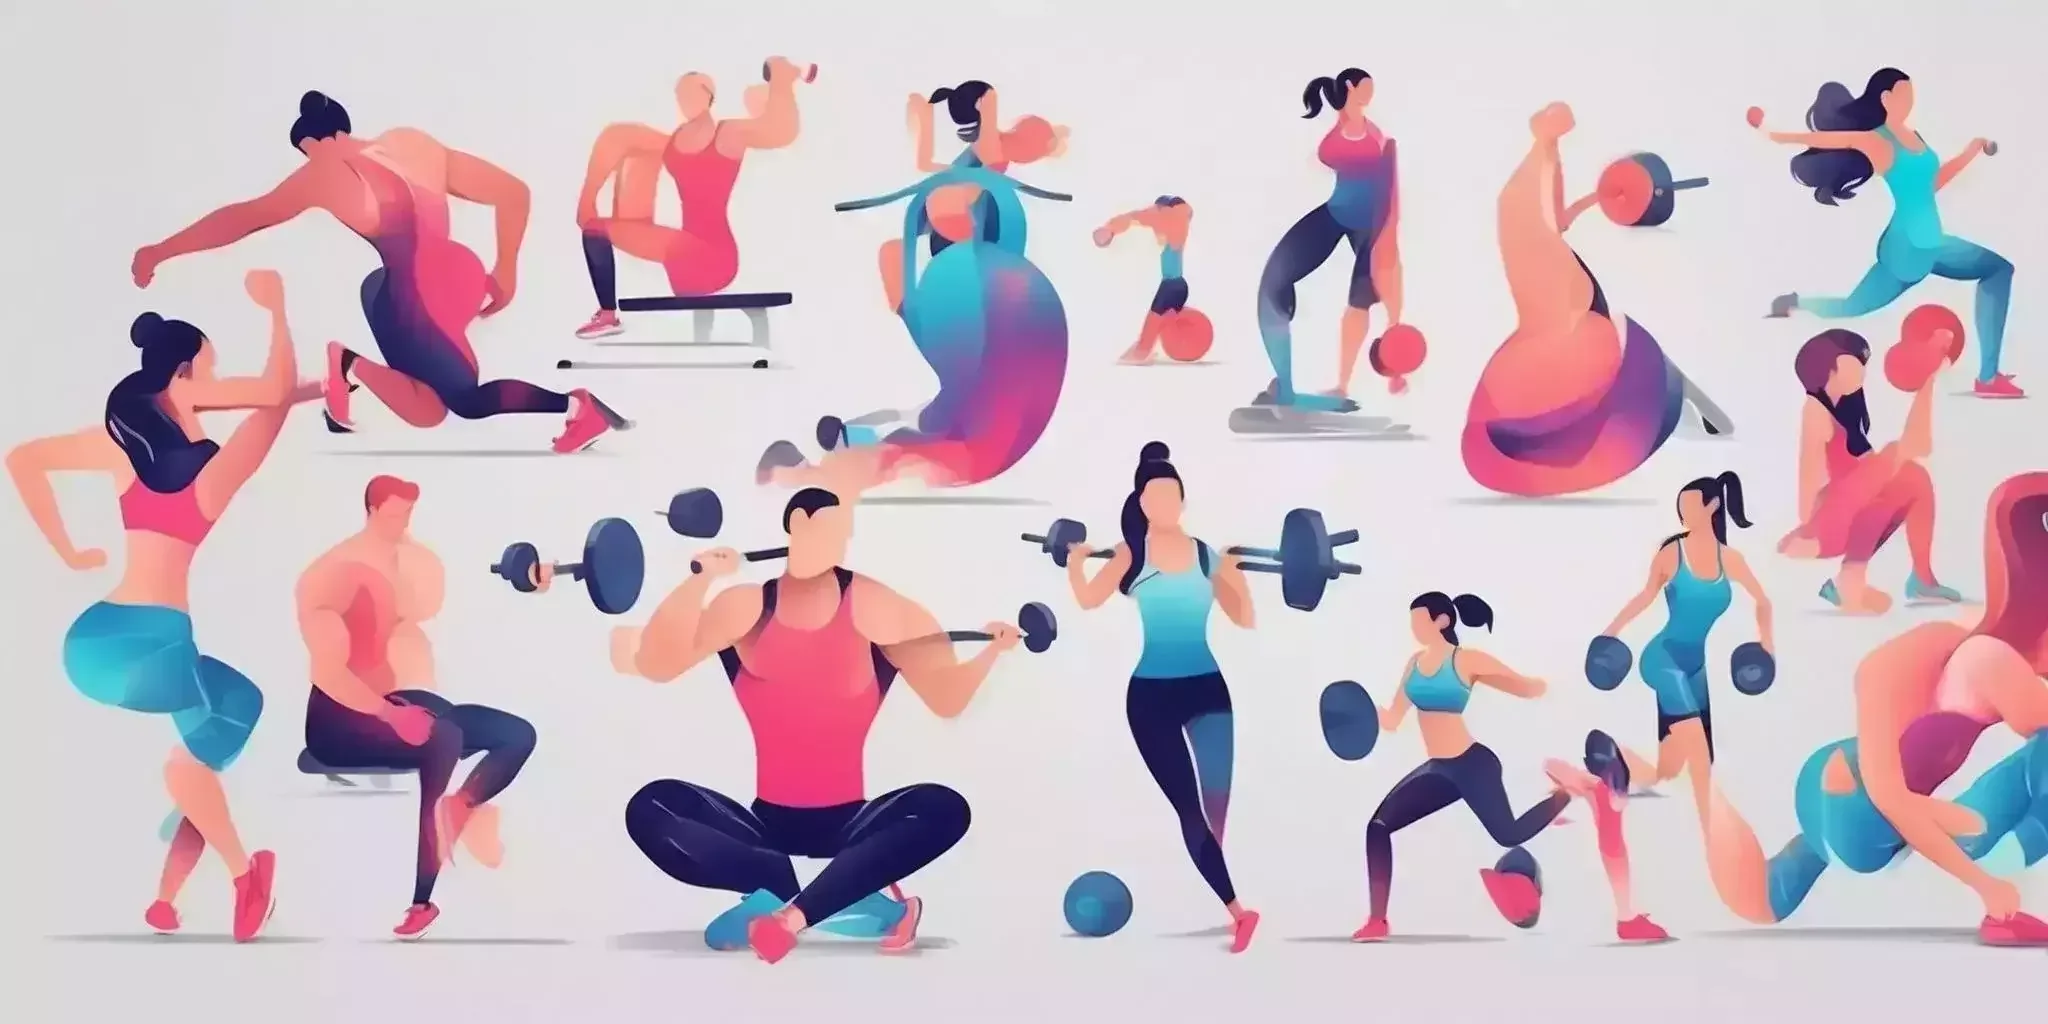 fitness in illustration style with gradients and white background